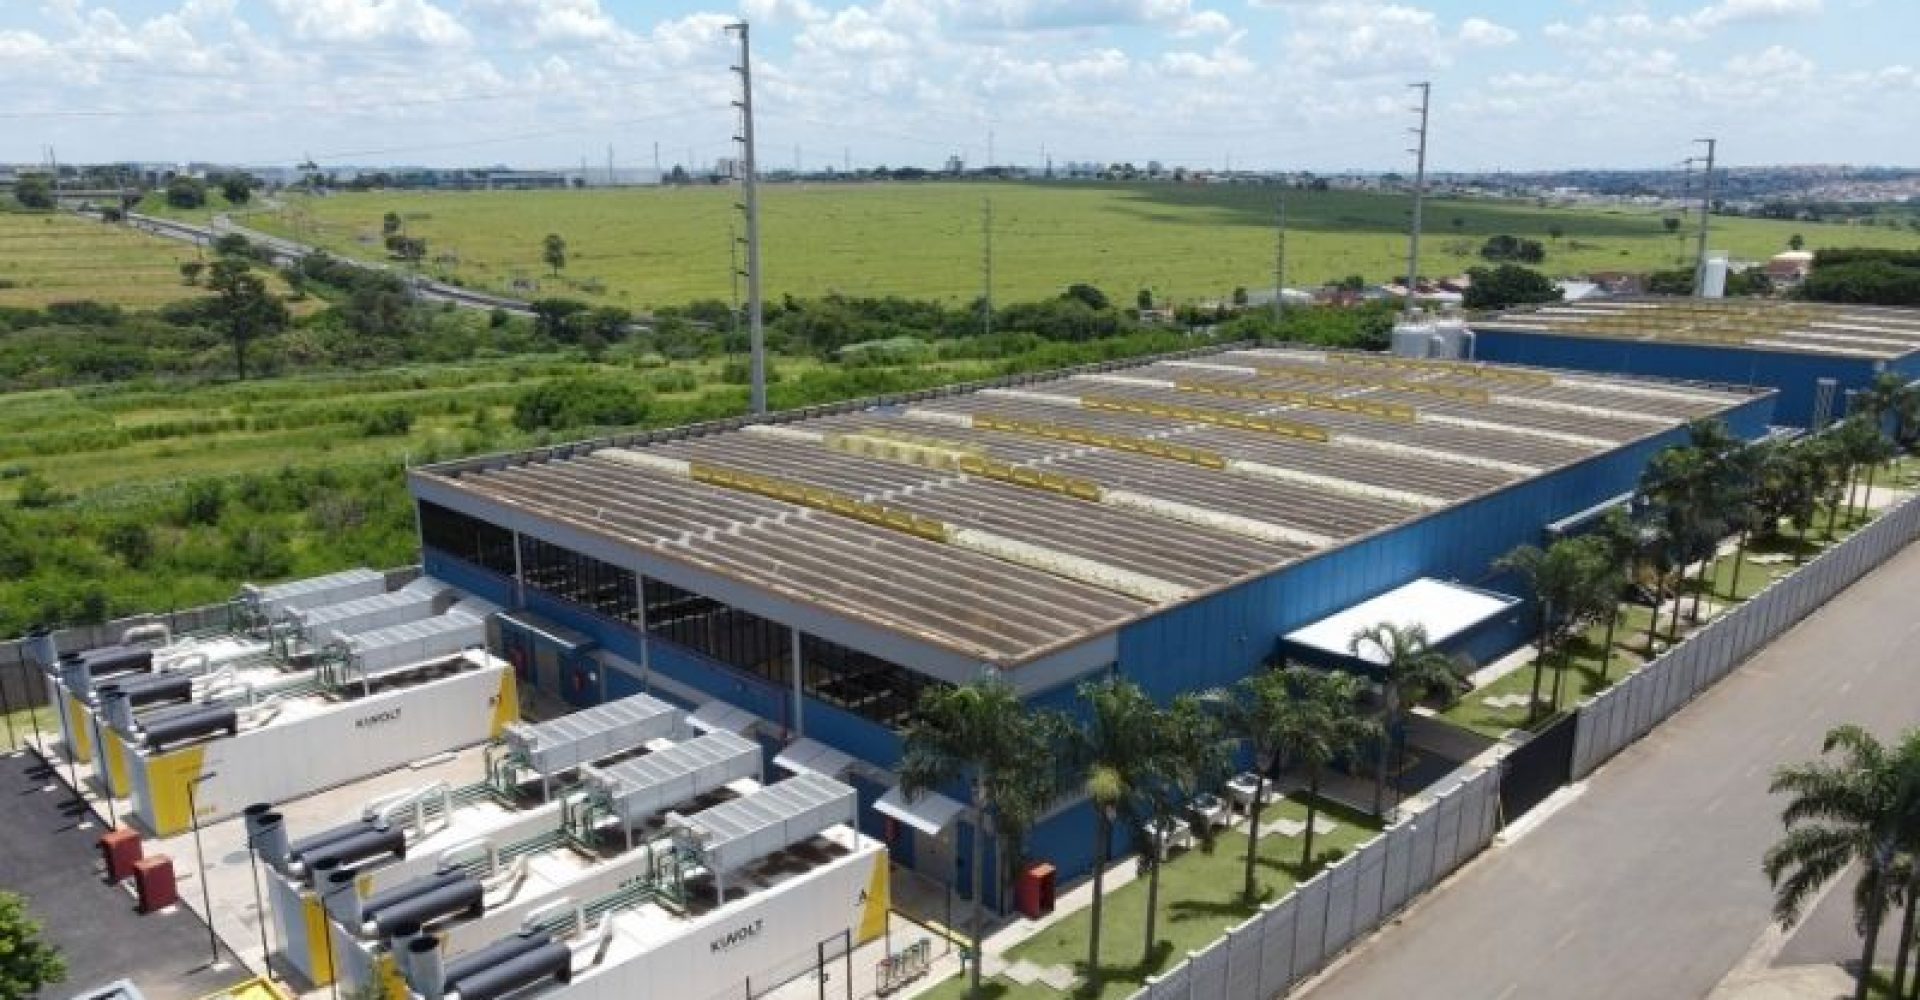 Ascenty kicks off the construction of five more data centers in Brazil